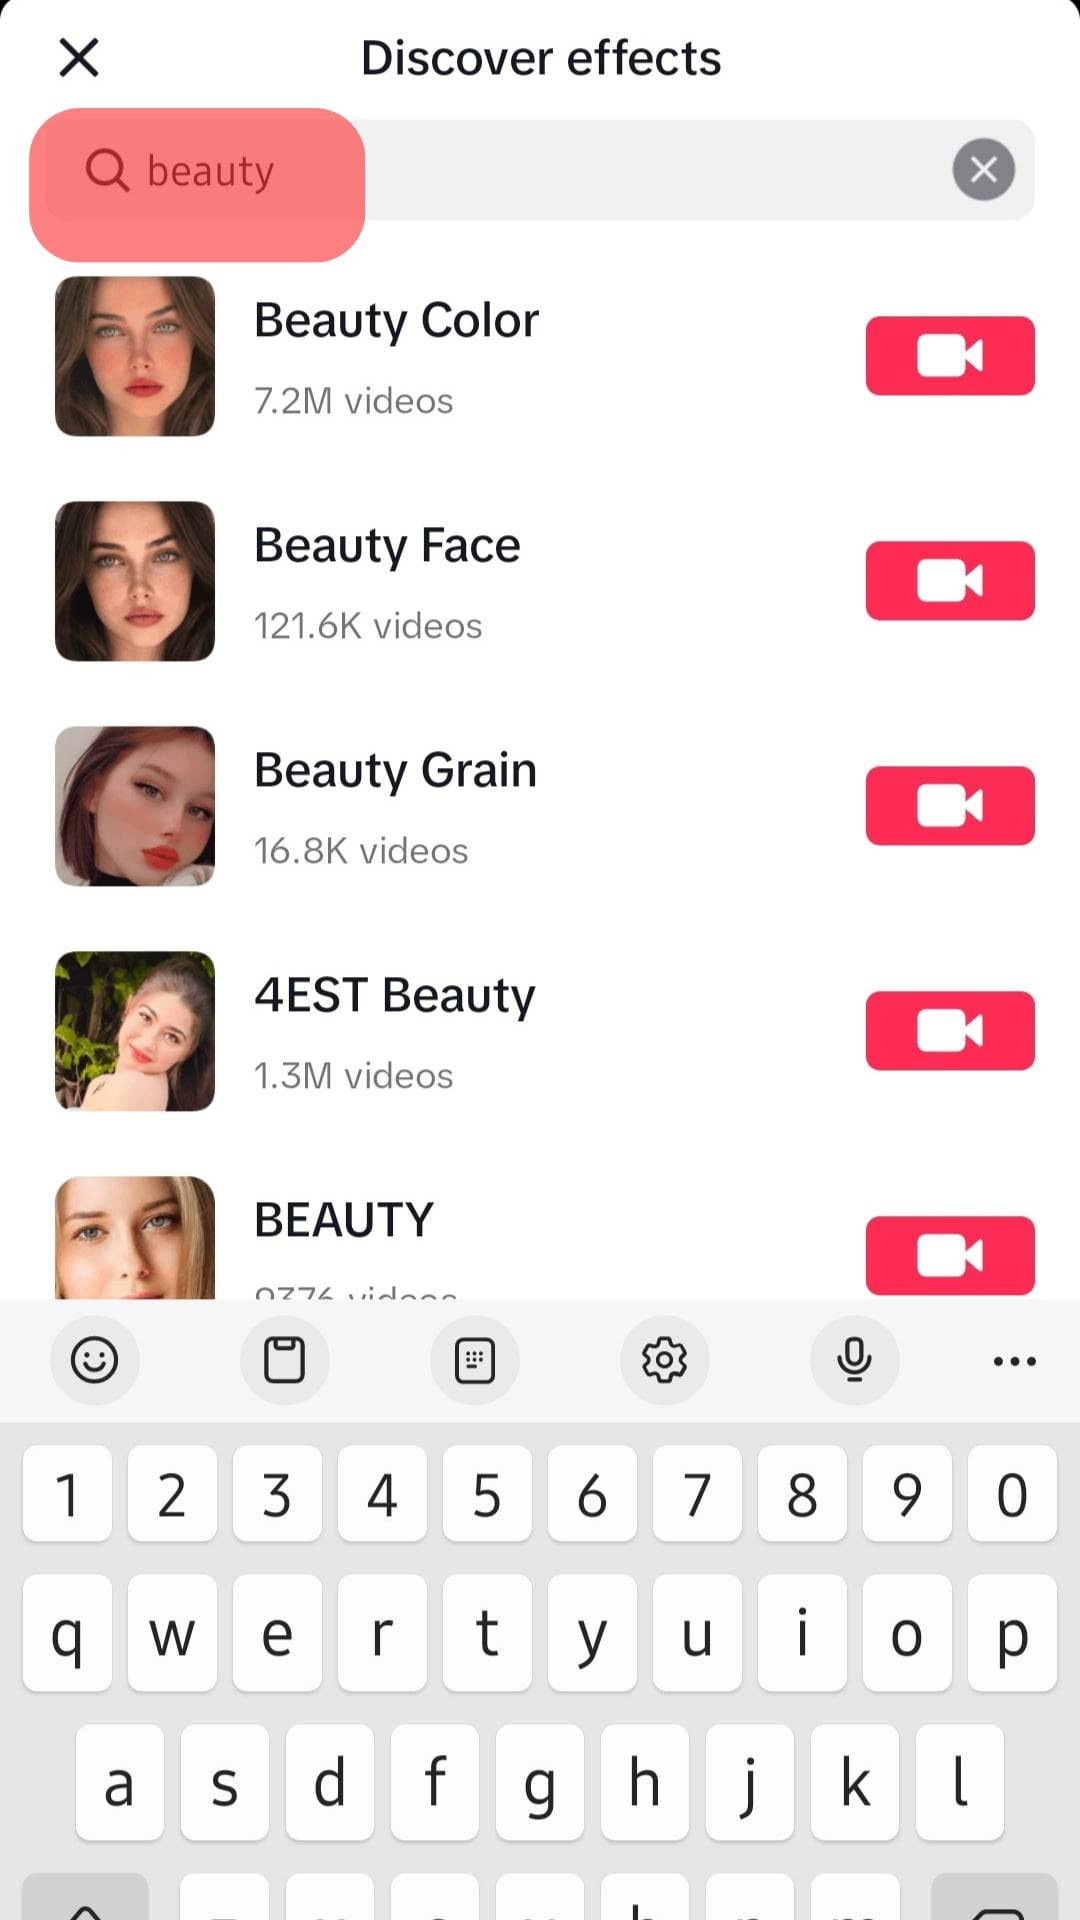 Tap The Search Button And Search For Beauty.